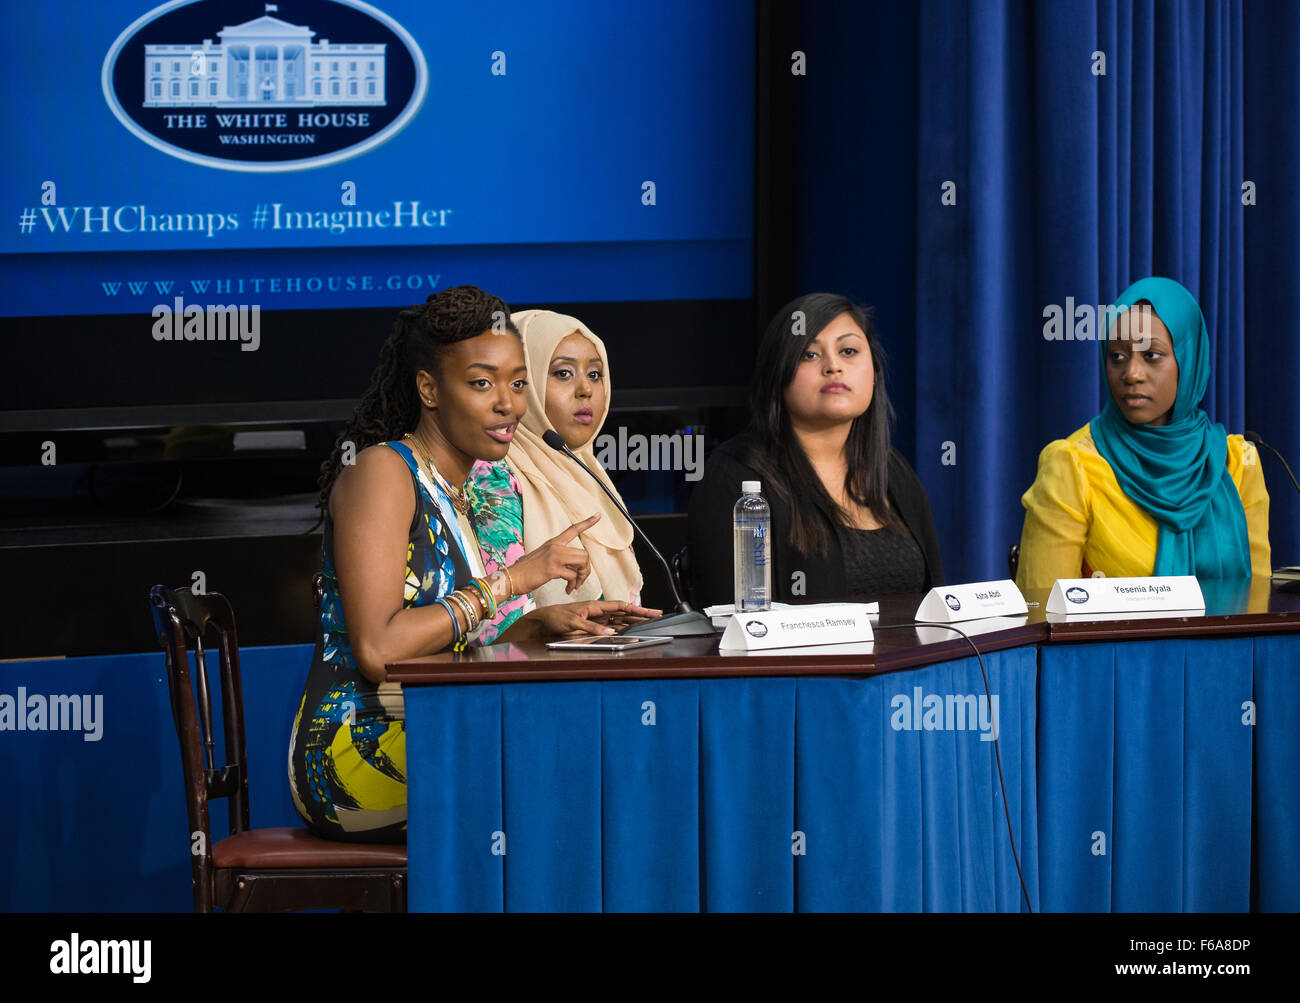 Franchesca Ramsey moderates a panel discussion with (from left to right) Asha Abdi, Yesenia Ayala, and Faatimah Knight at the Young Women Empowering Communities: Champions of Change event on Tuesday, September 15, 2015 at the Eisenhower Executive Office Building in Washington, DC. The Champions of Change program was created by the White House to recognize 'individuals doing extraordinary things to empower and inspire members of their communities.' Photo Credit: (NASA/Aubrey Gemignani). Stock Photo